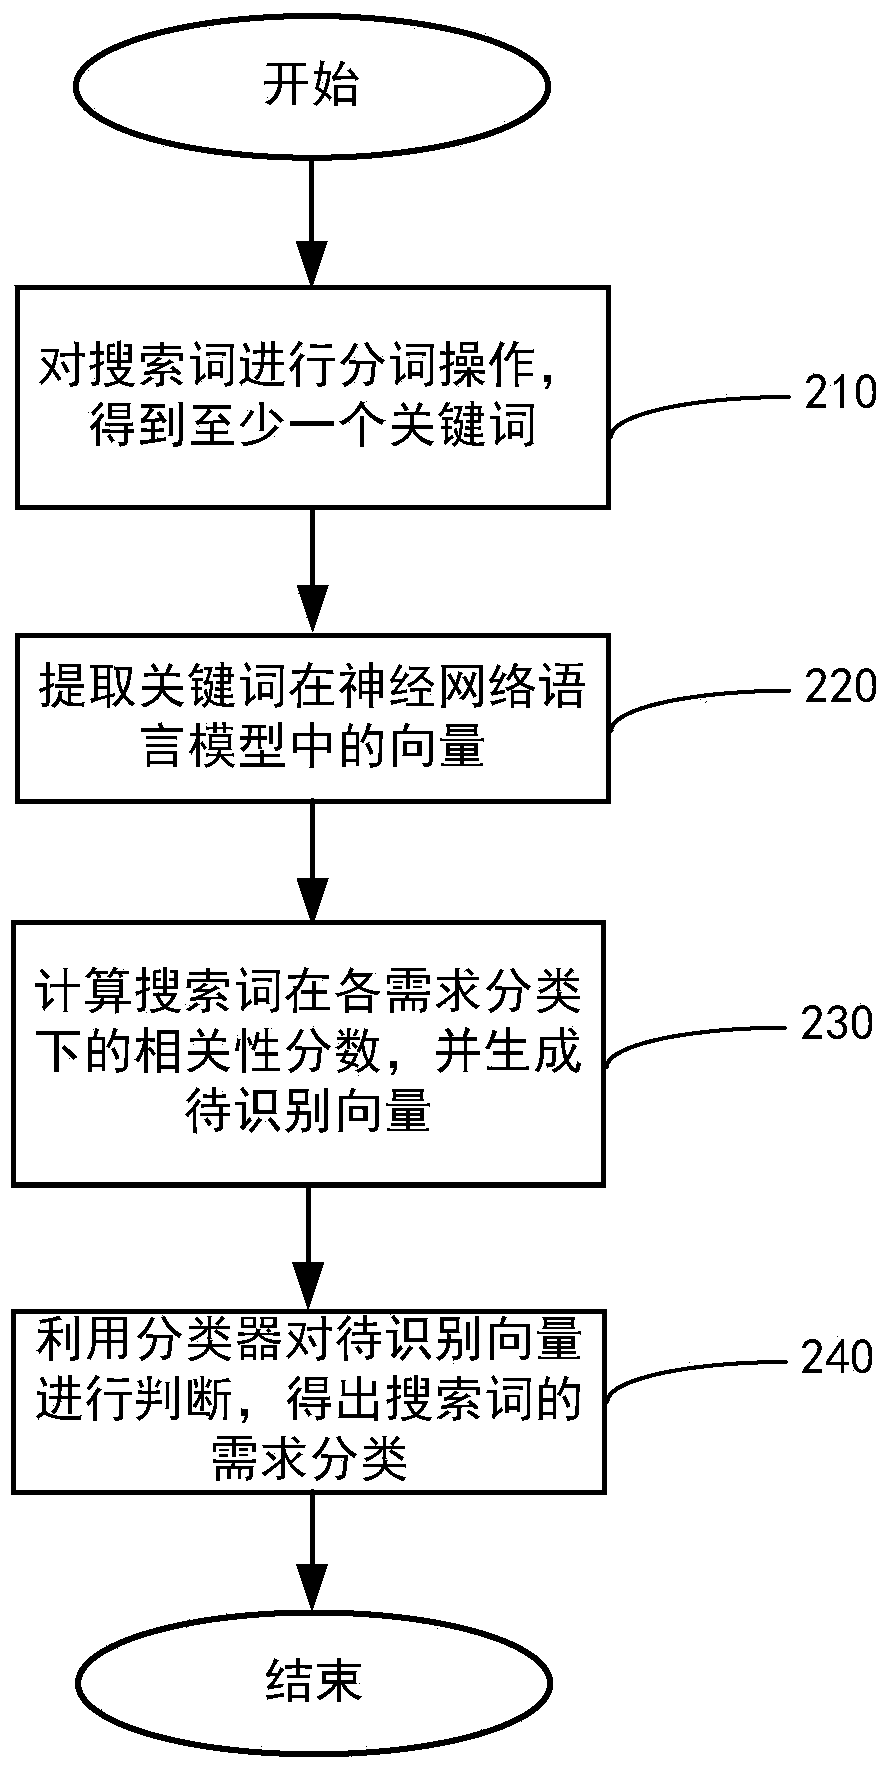 Method and system for identifying demand classification corresponding to searching